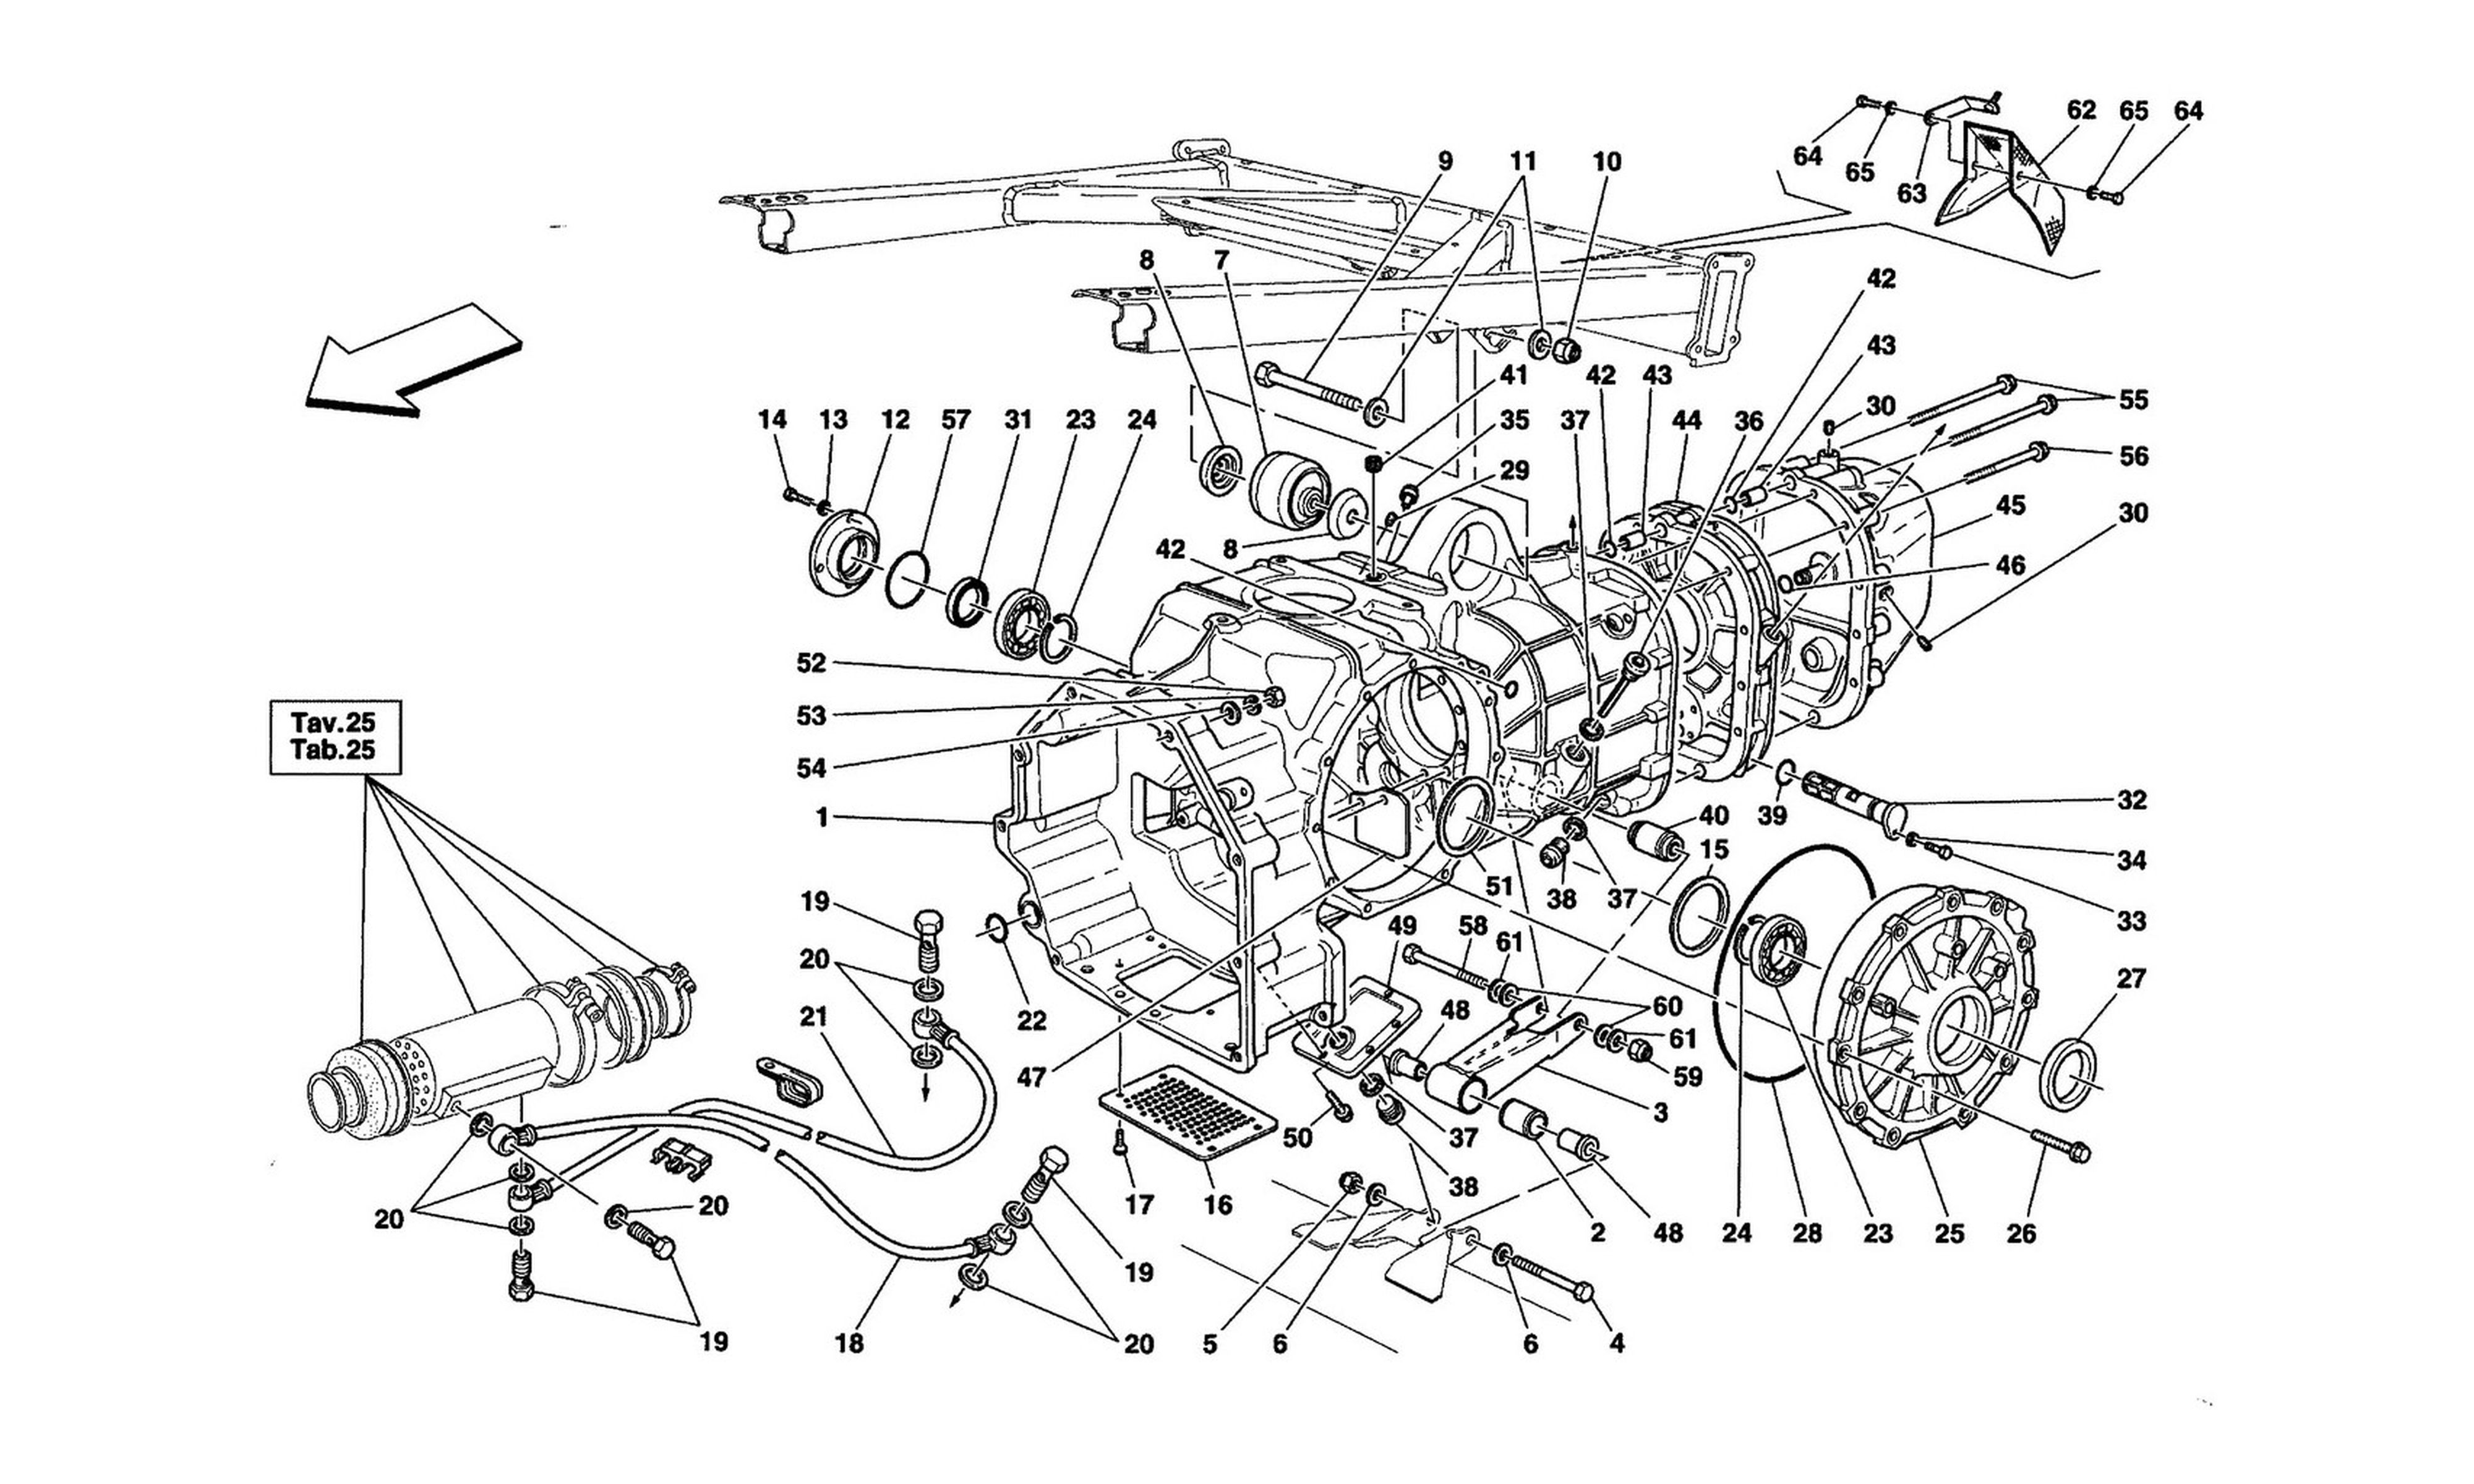 Schematic: Gearbox - Covers